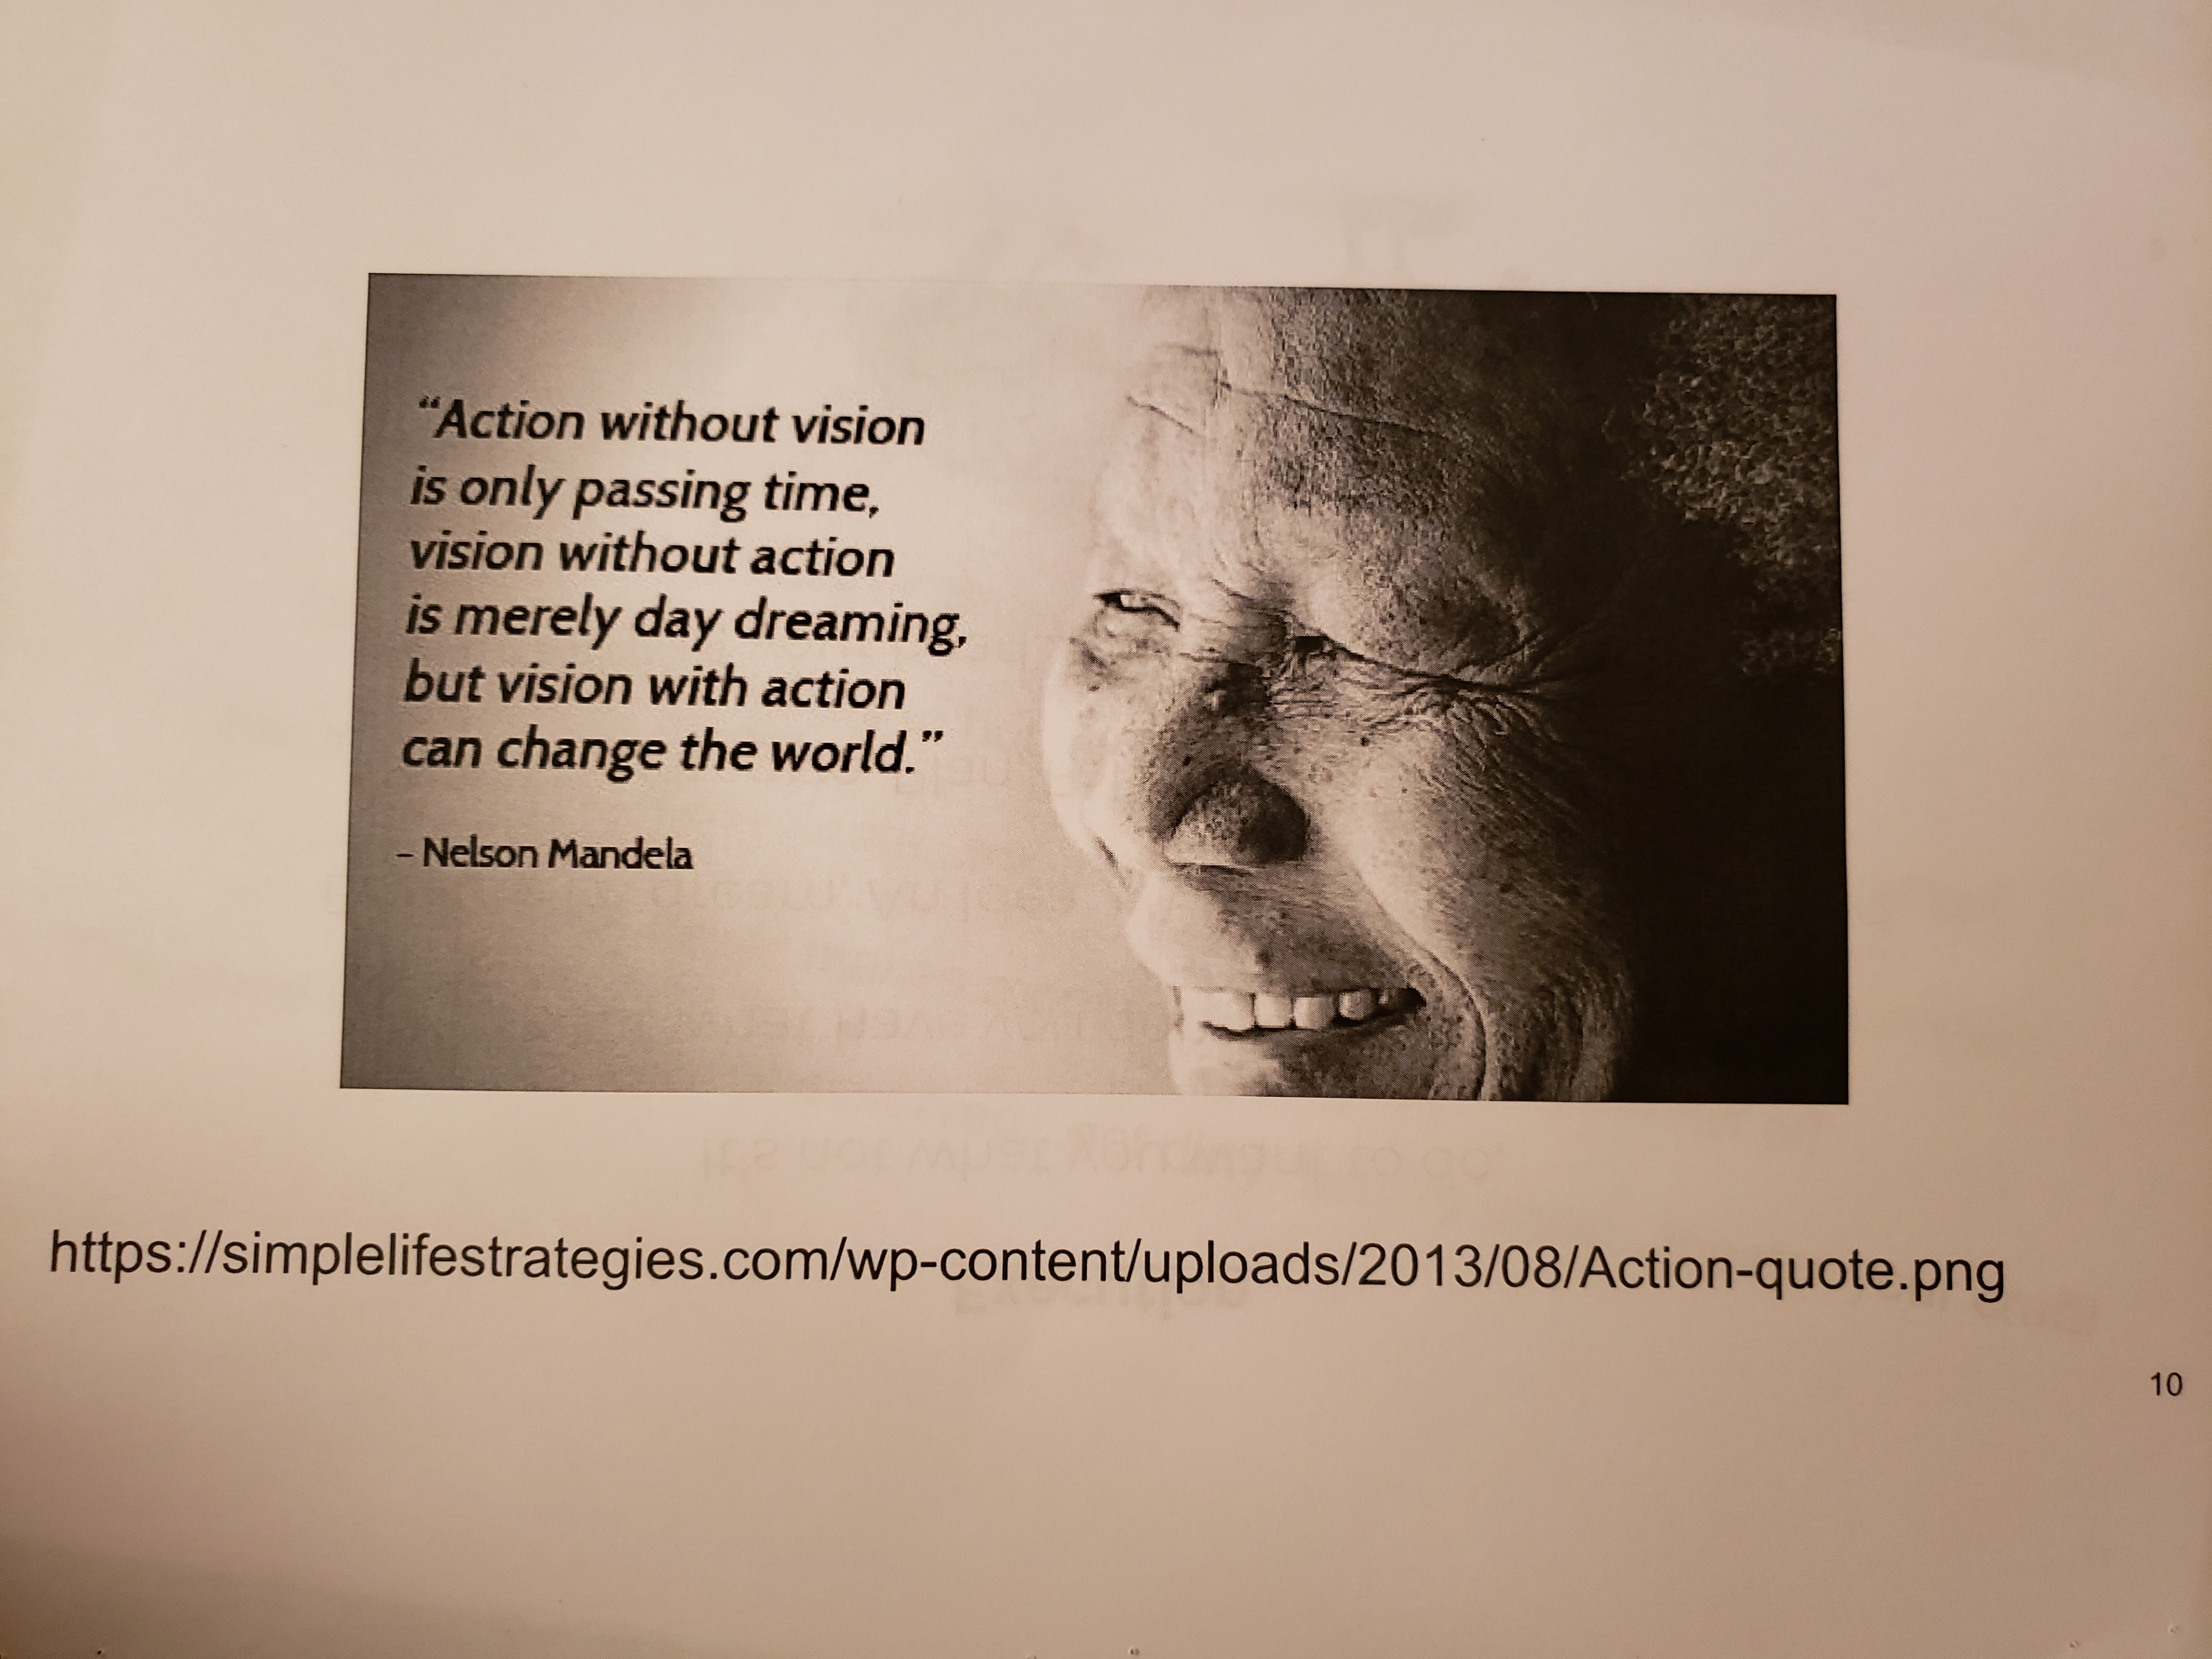 A quote from Nelson Mandela on Vision